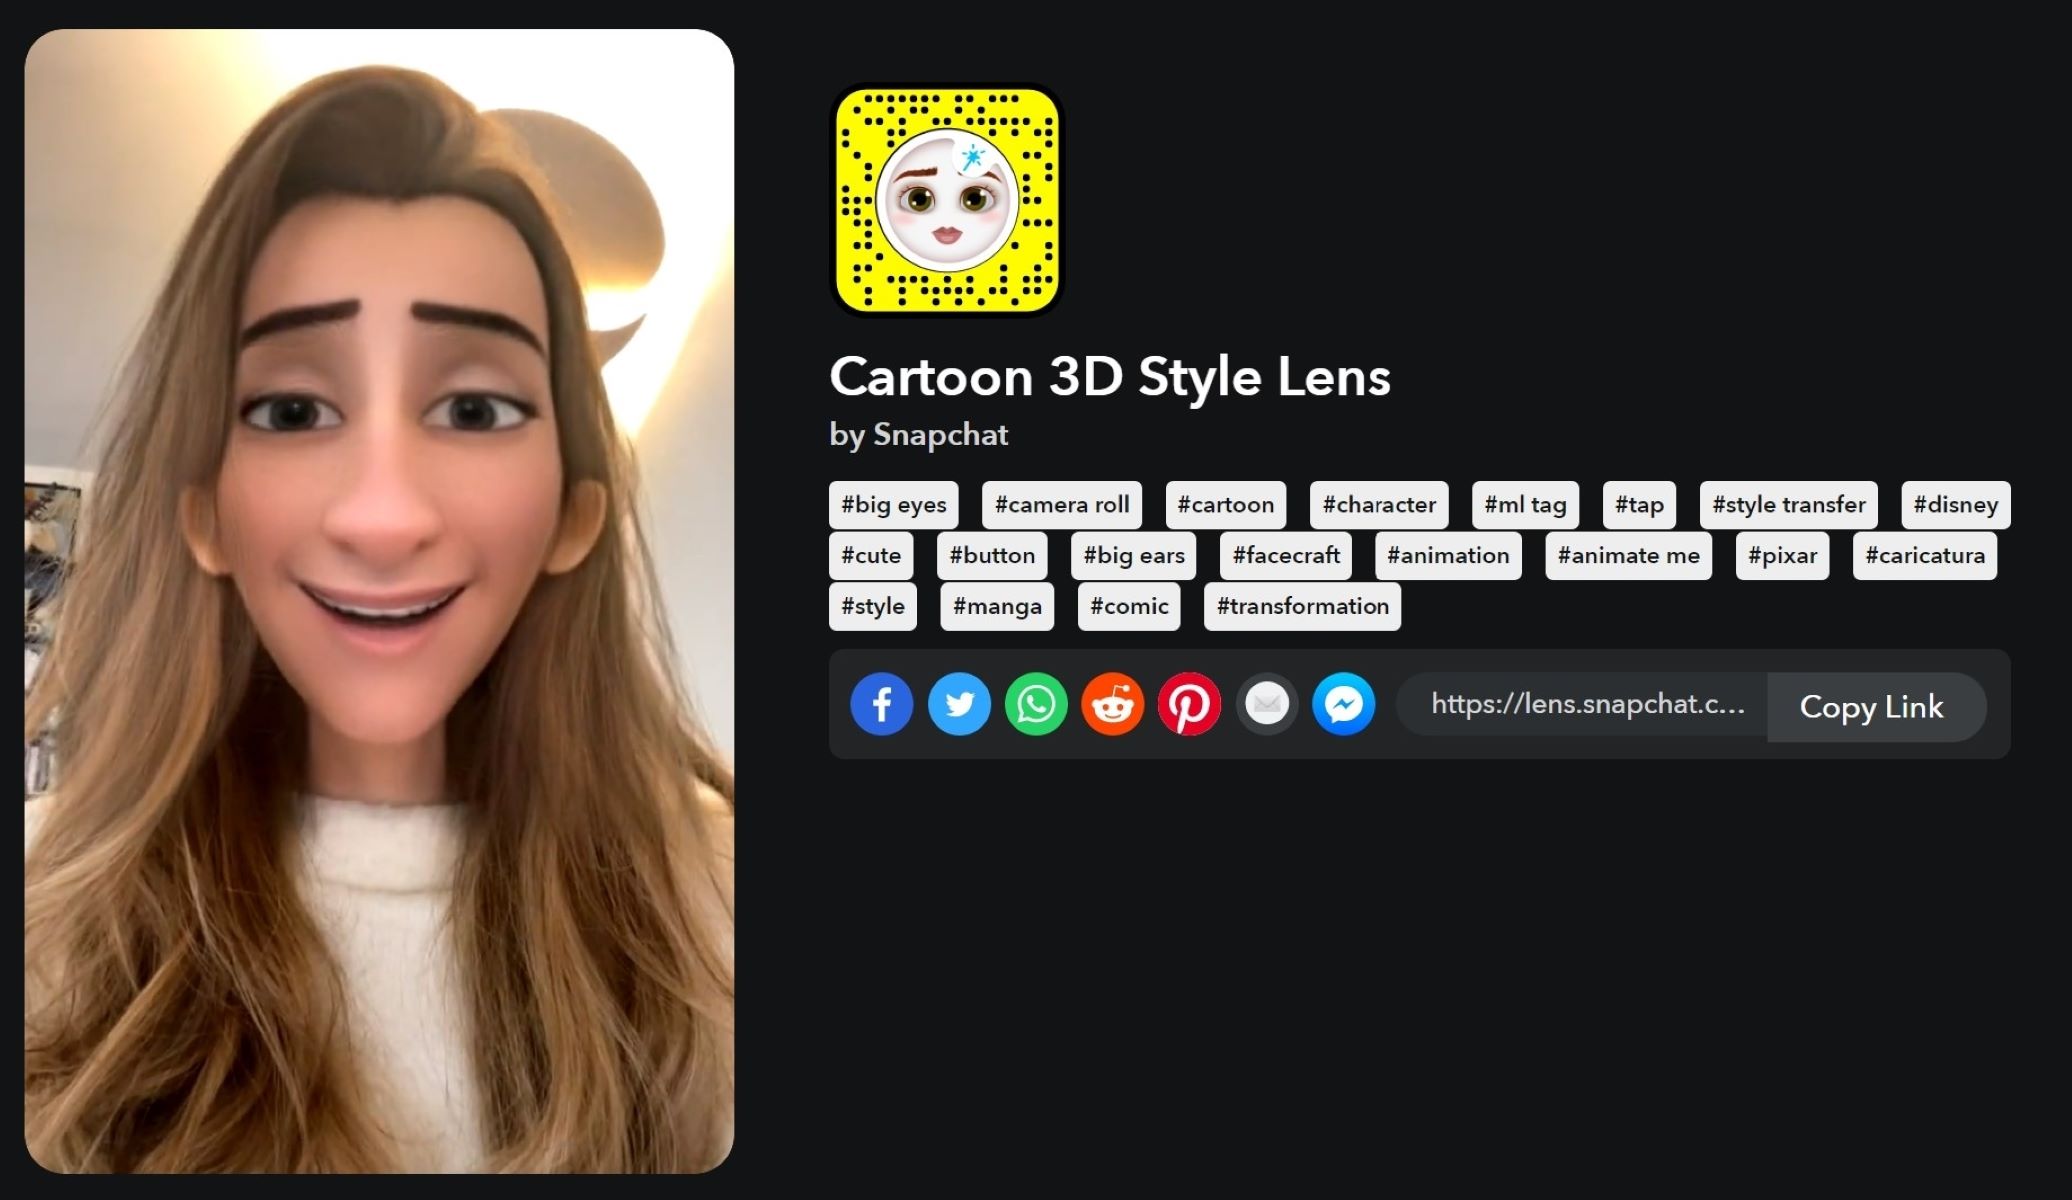 Snapchat Releases Exclusive Lens Face Filters for the iPhone X Using ...